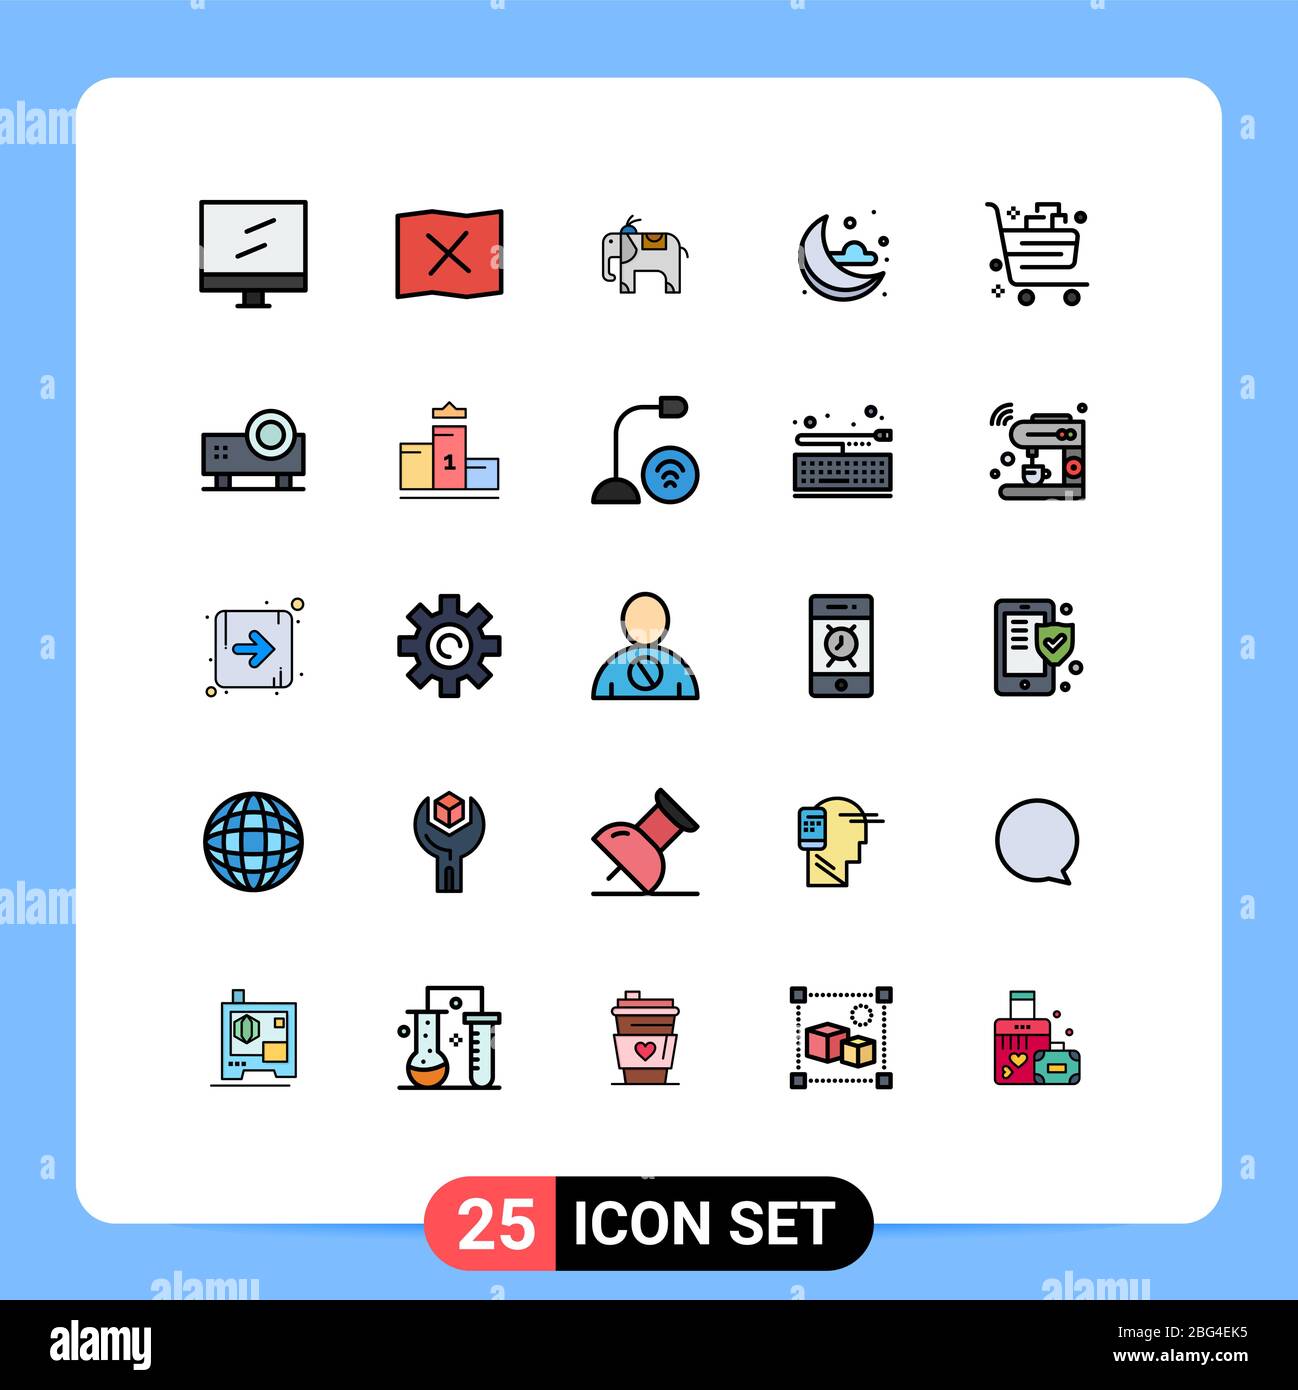 Moon - Download free icons